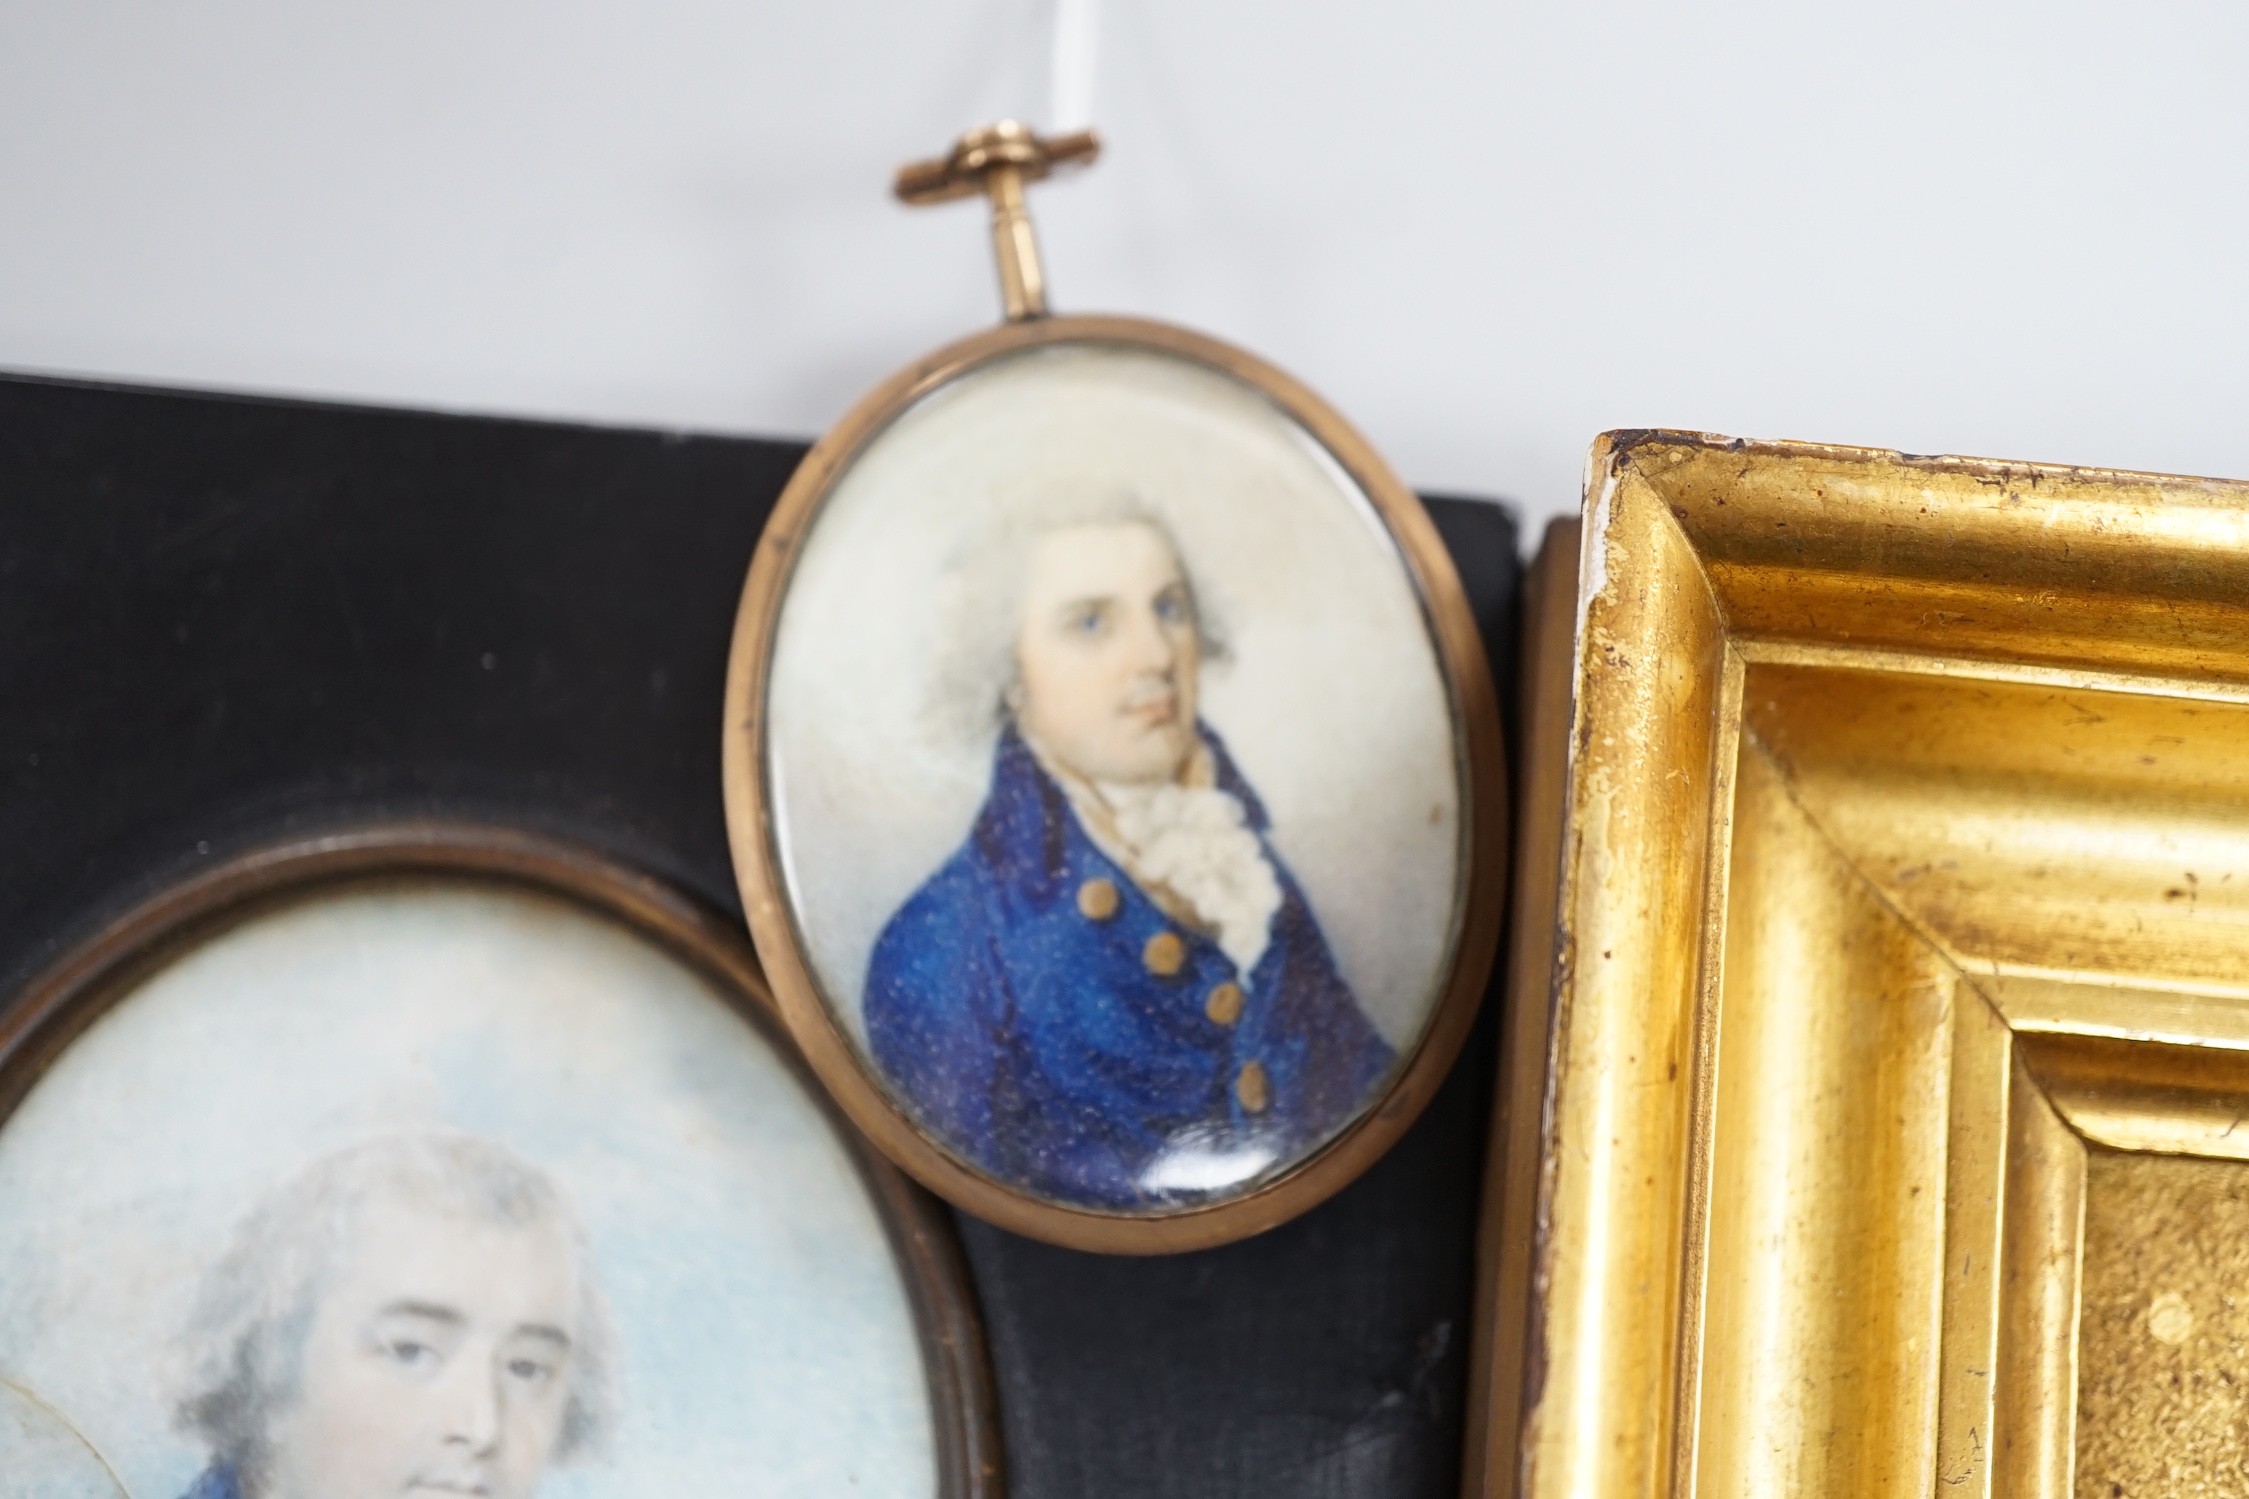 A selection of three watercolour portrait miniatures on ivory relating to the Potenger Family